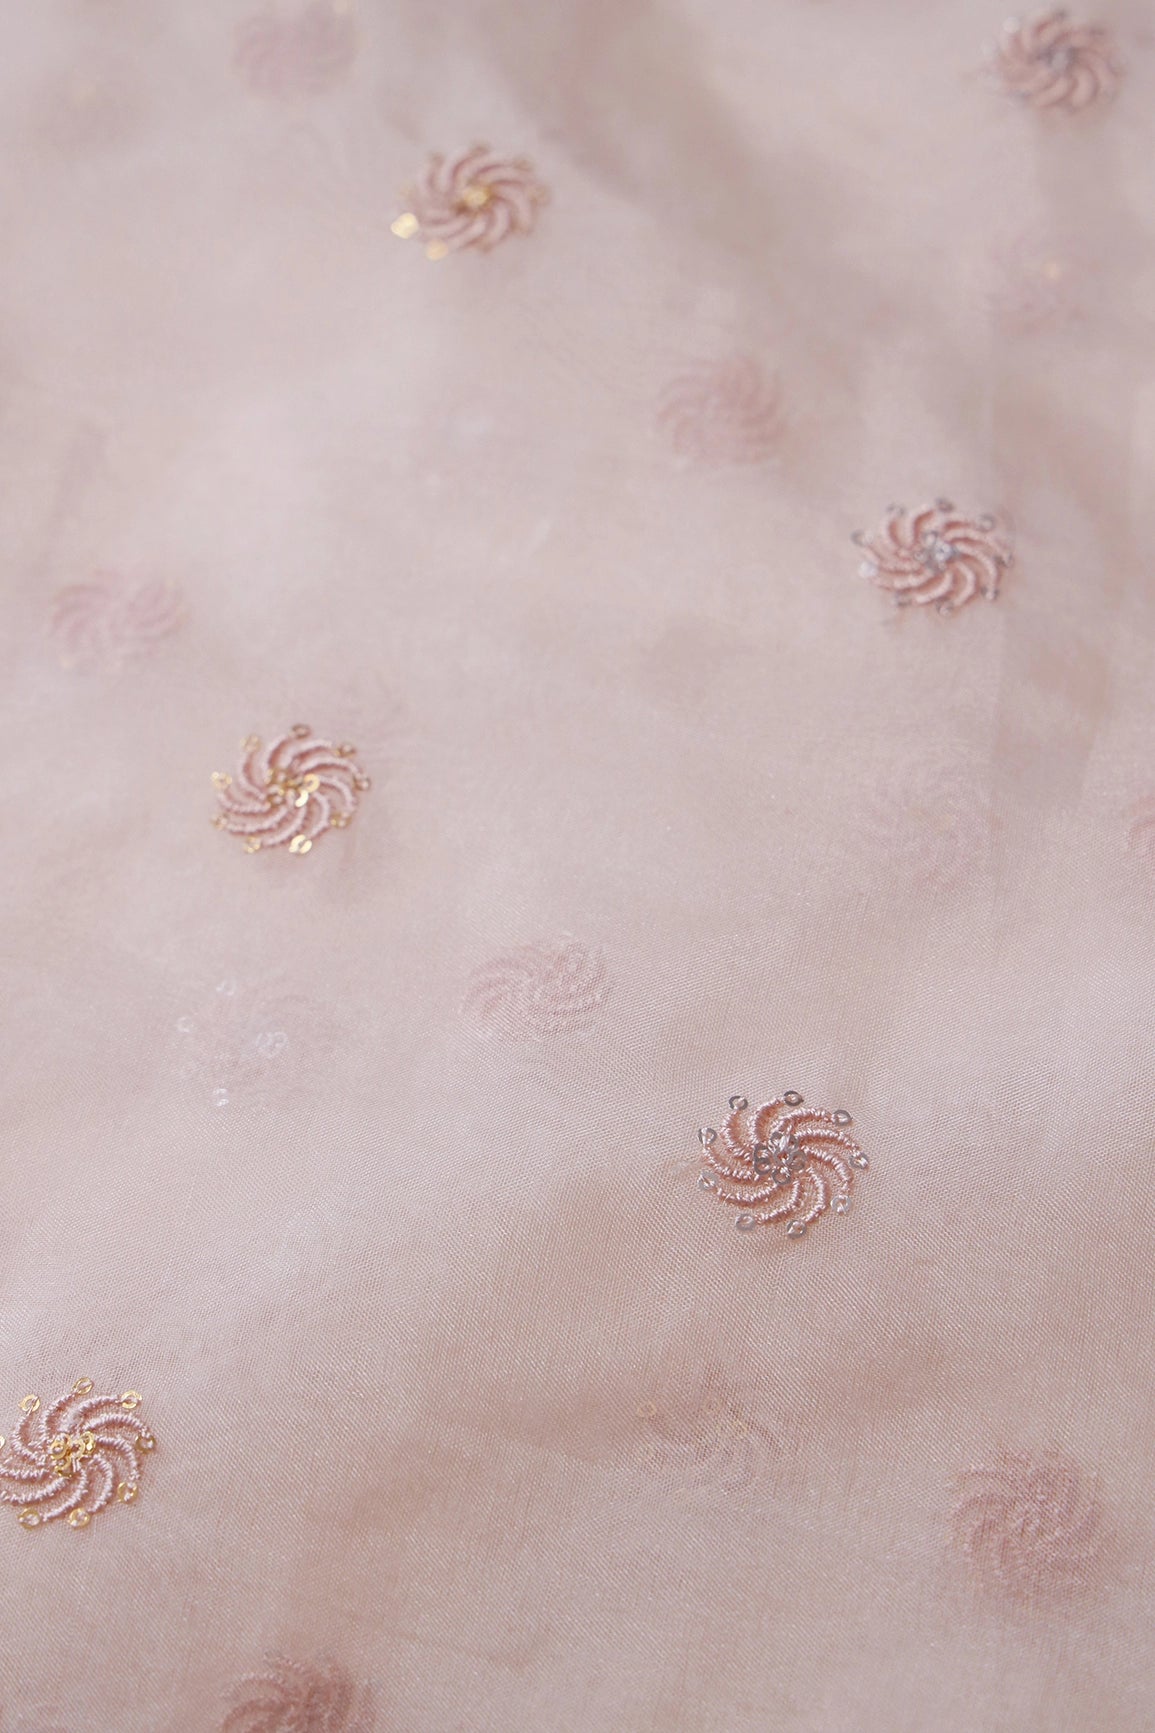 Gold And Silver Sequins Beautiful Small Motif Embroidery Work On Pastel Peach Organza Fabric